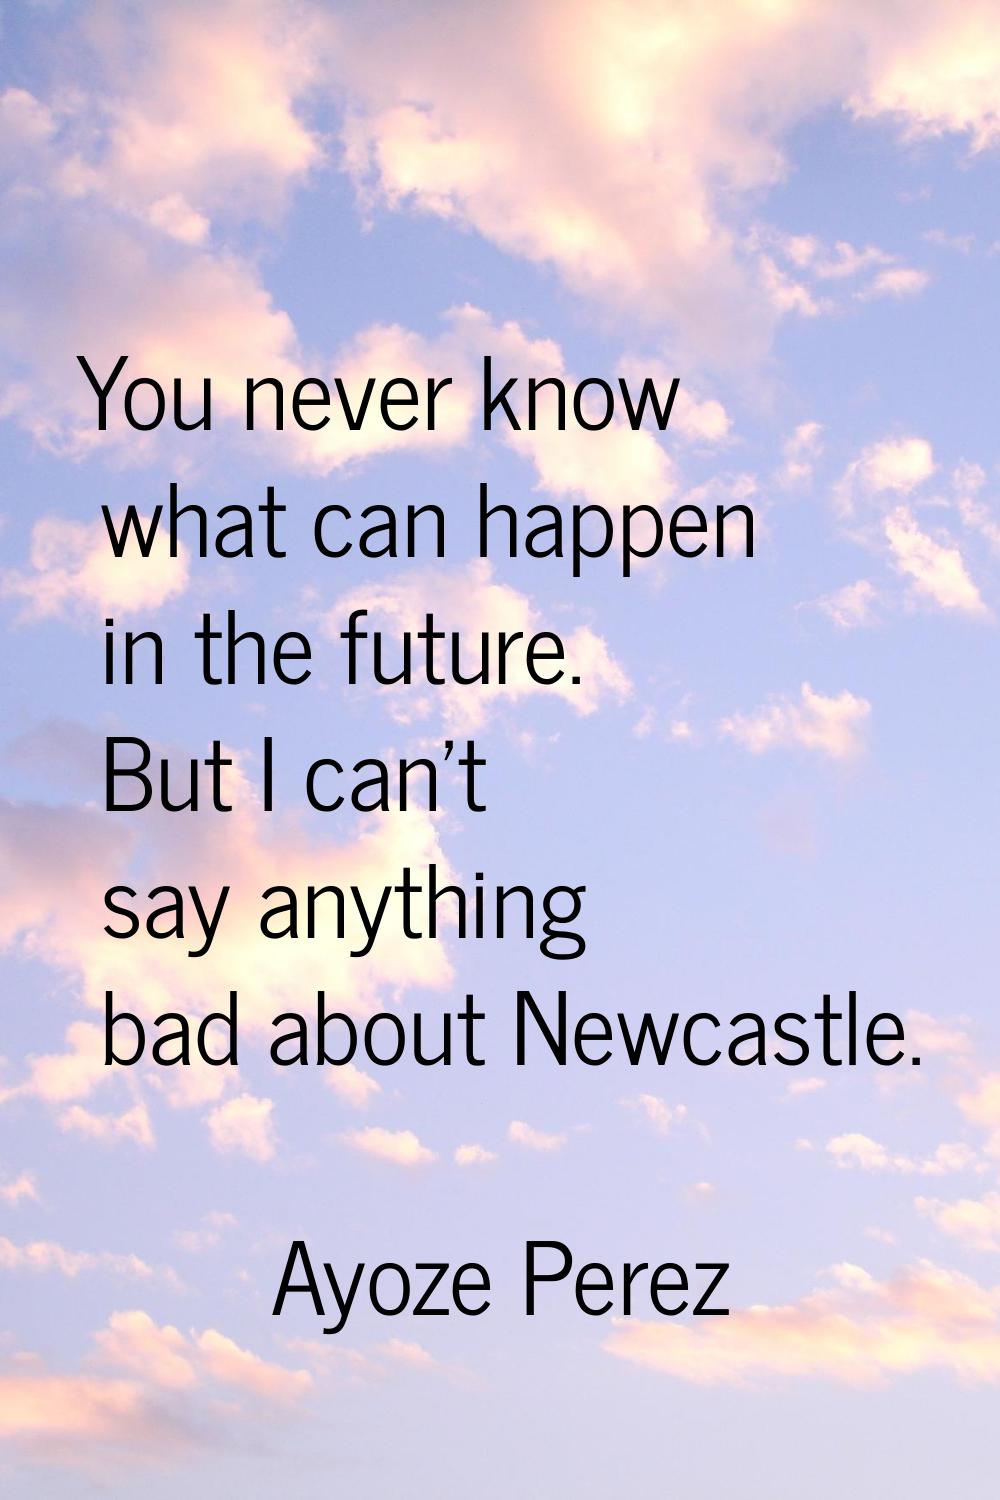 You never know what can happen in the future. But I can't say anything bad about Newcastle.